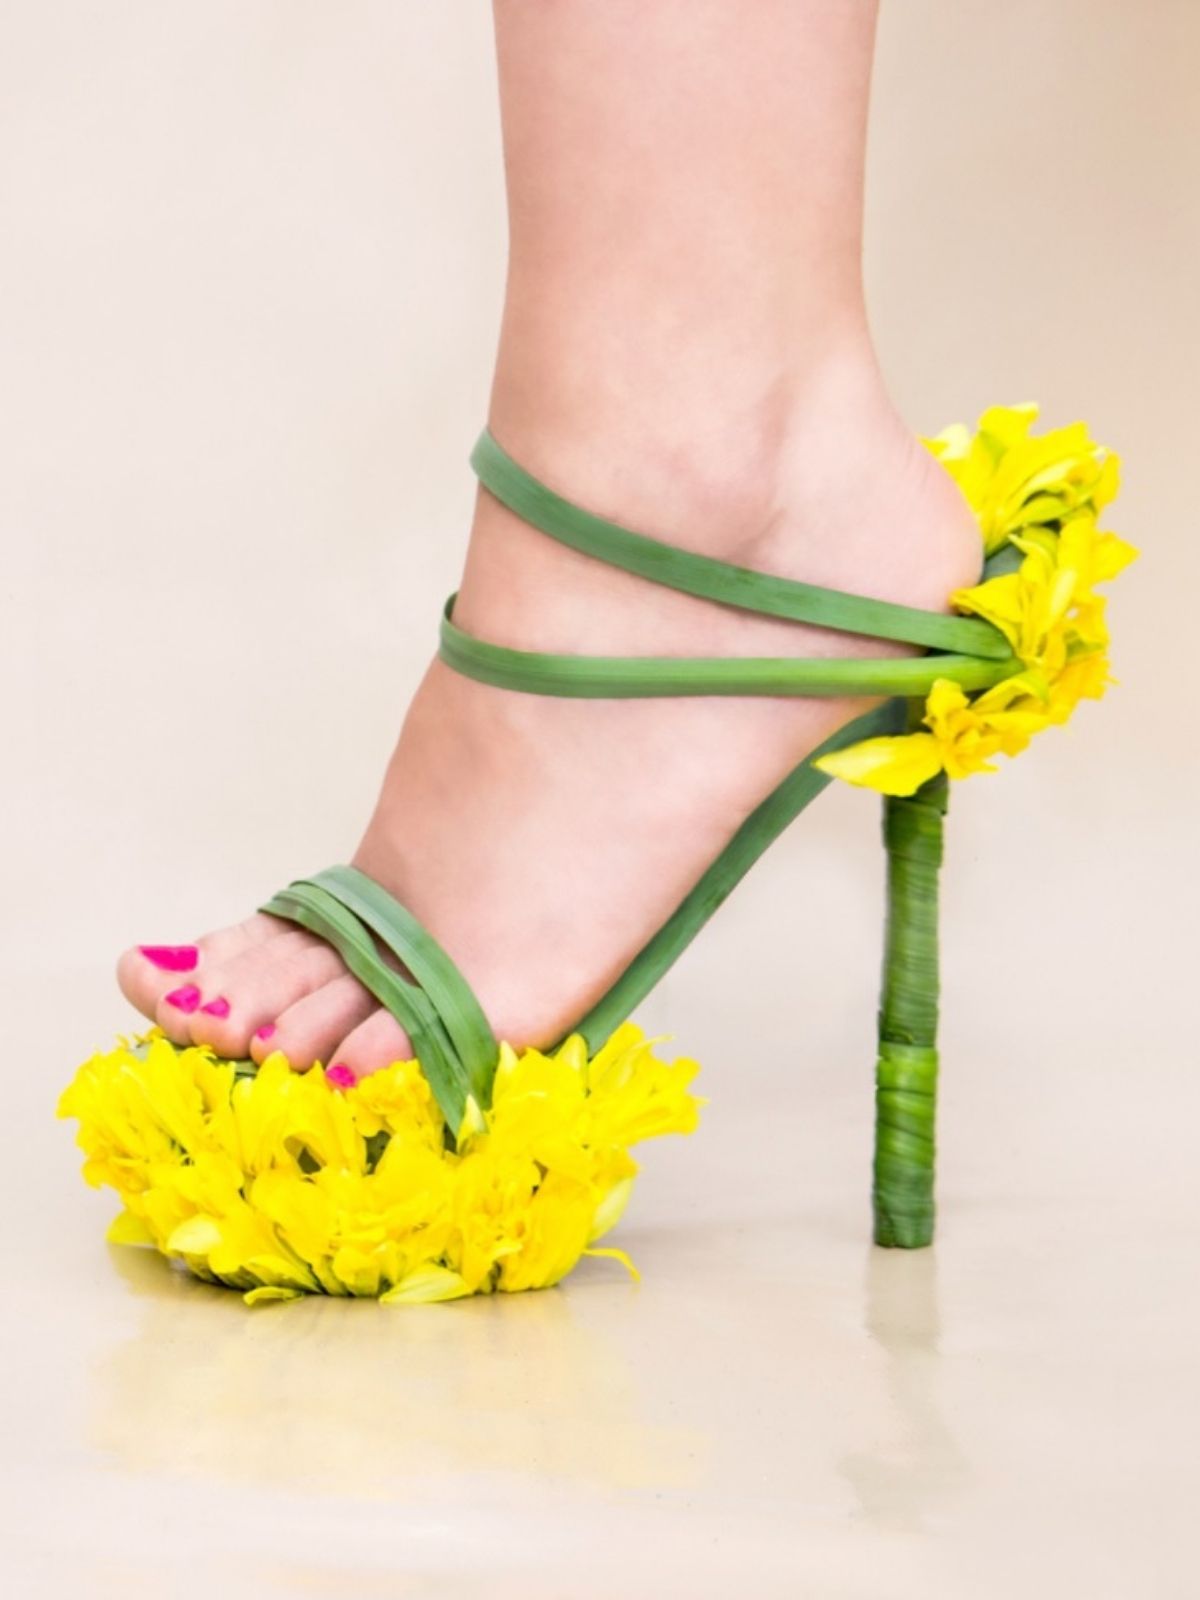 Make a Fashion Statement With These Unique Green Slippers - yellow flower shoes - Pantoufle de Vert article on thursd